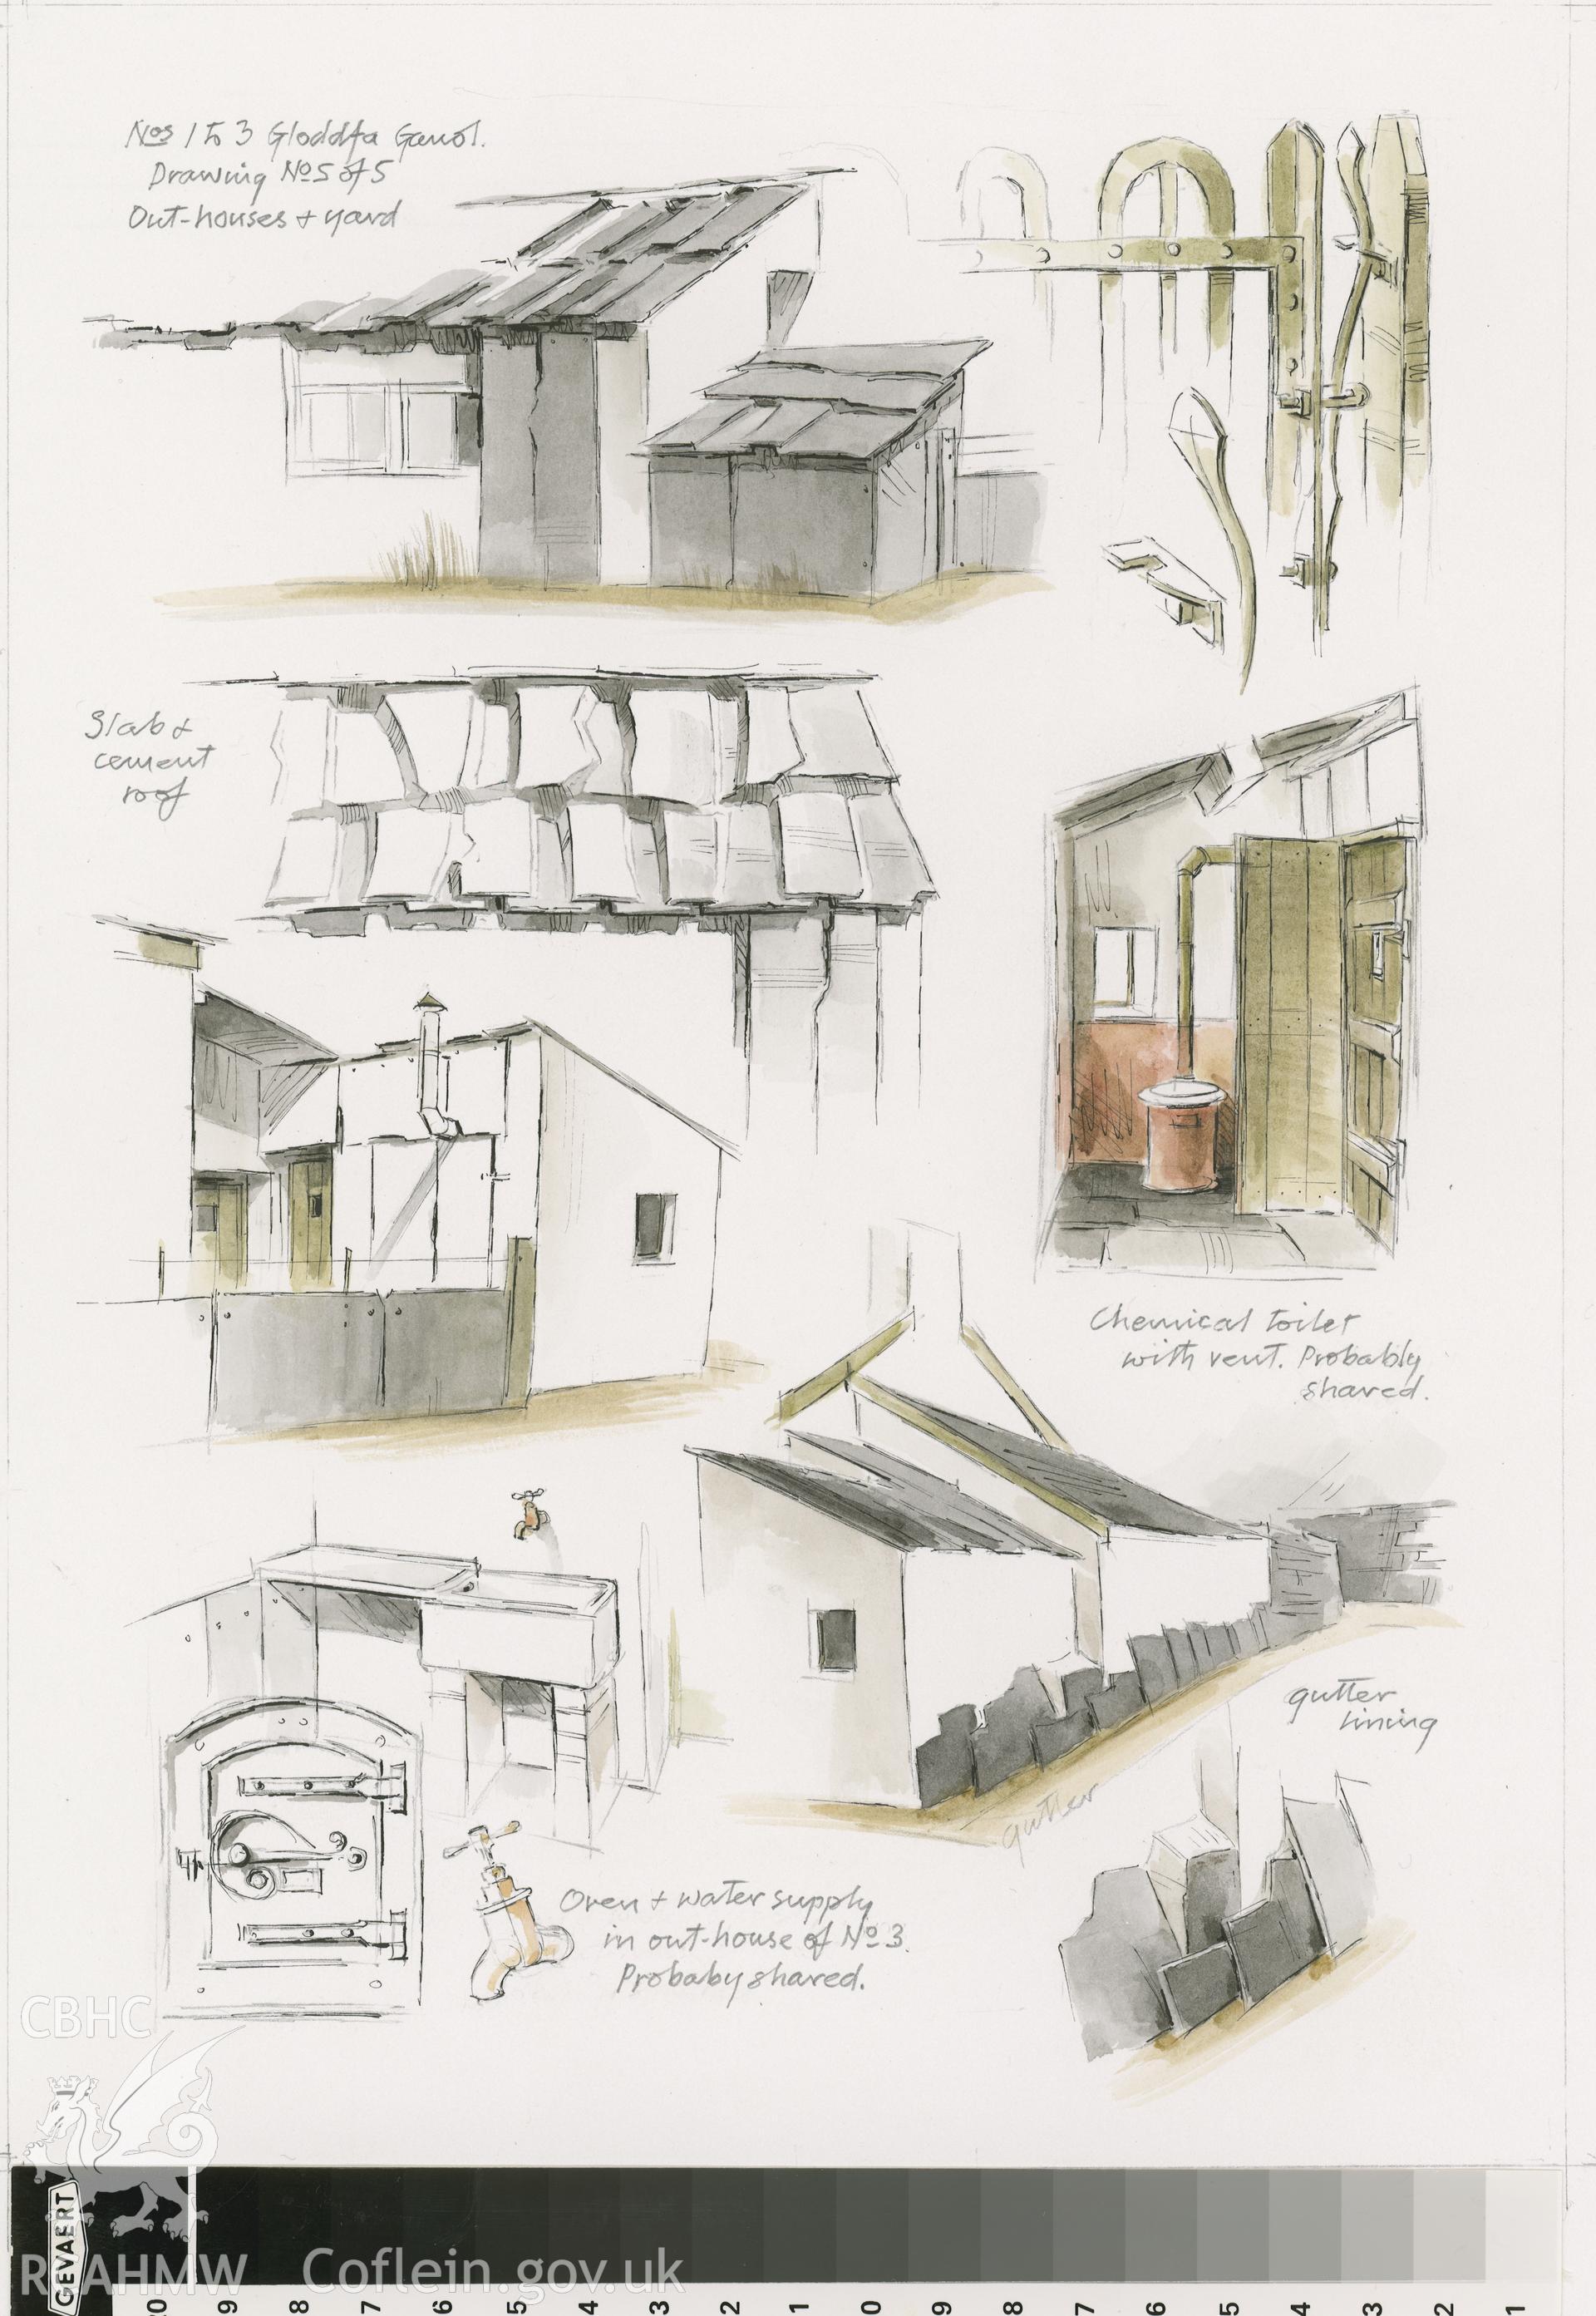 Gloddfa Ganol Cottages - Outhouses and Yard: (pencil, ink and watercolour) drawing.